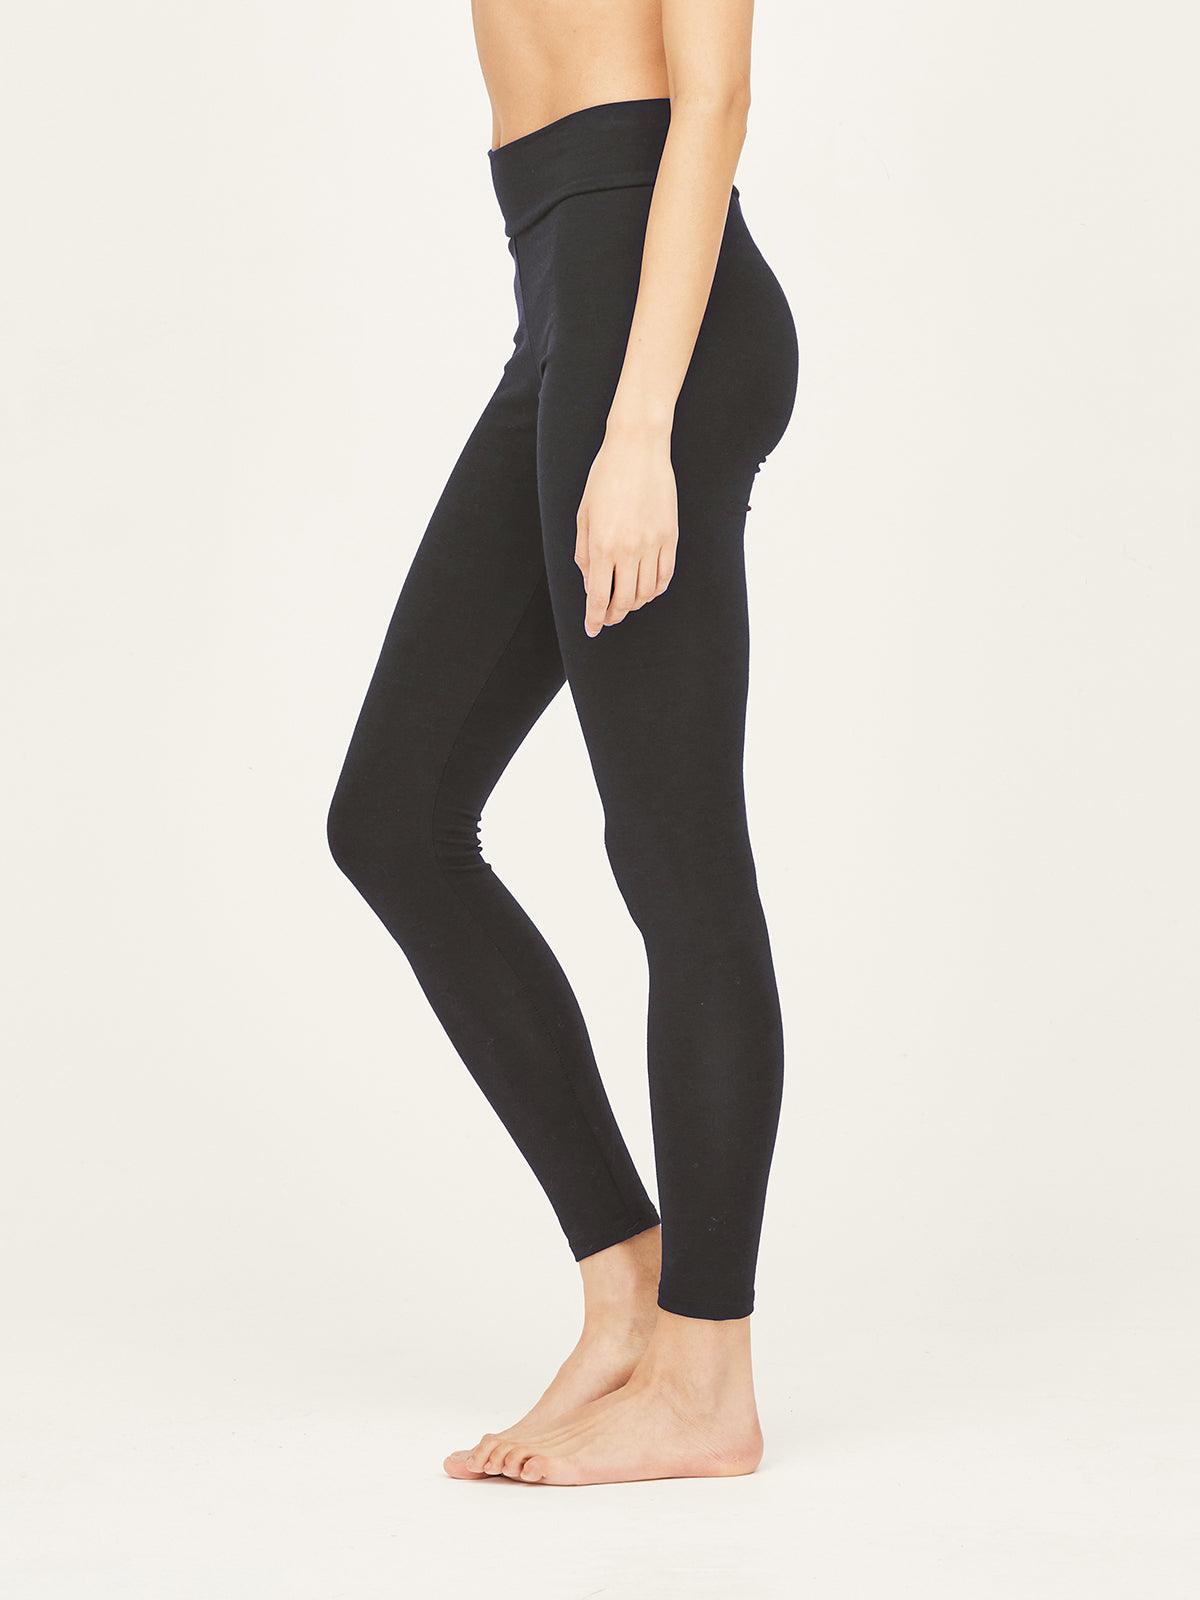 Essential Bamboo Organic Cotton Thick Leggings - Thought Clothing UK